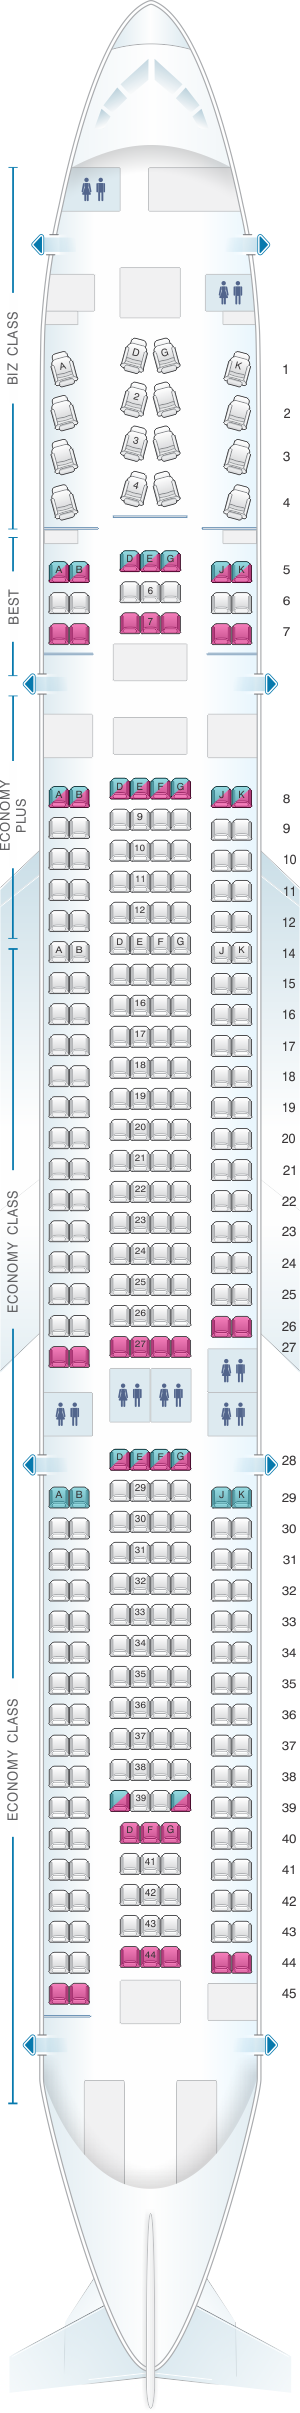 Seat map for Eurowings Airbus A330 300